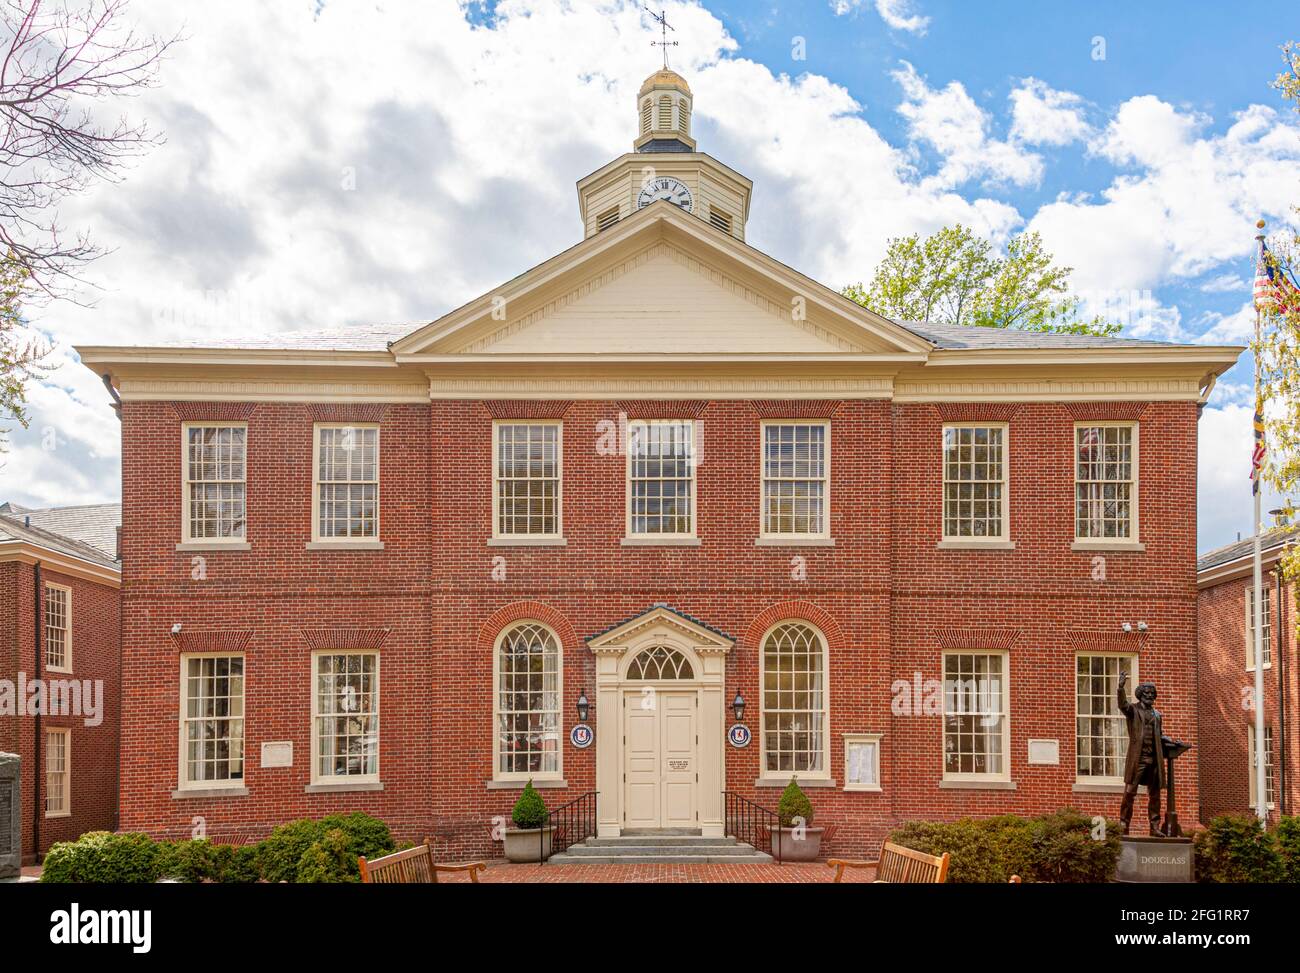 Easton ,MD, USA 04-16-2021: historic Courthouse building is among the oldest landmarks in the beautiful small town of Easton. Brick building has Talbo Stock Photo